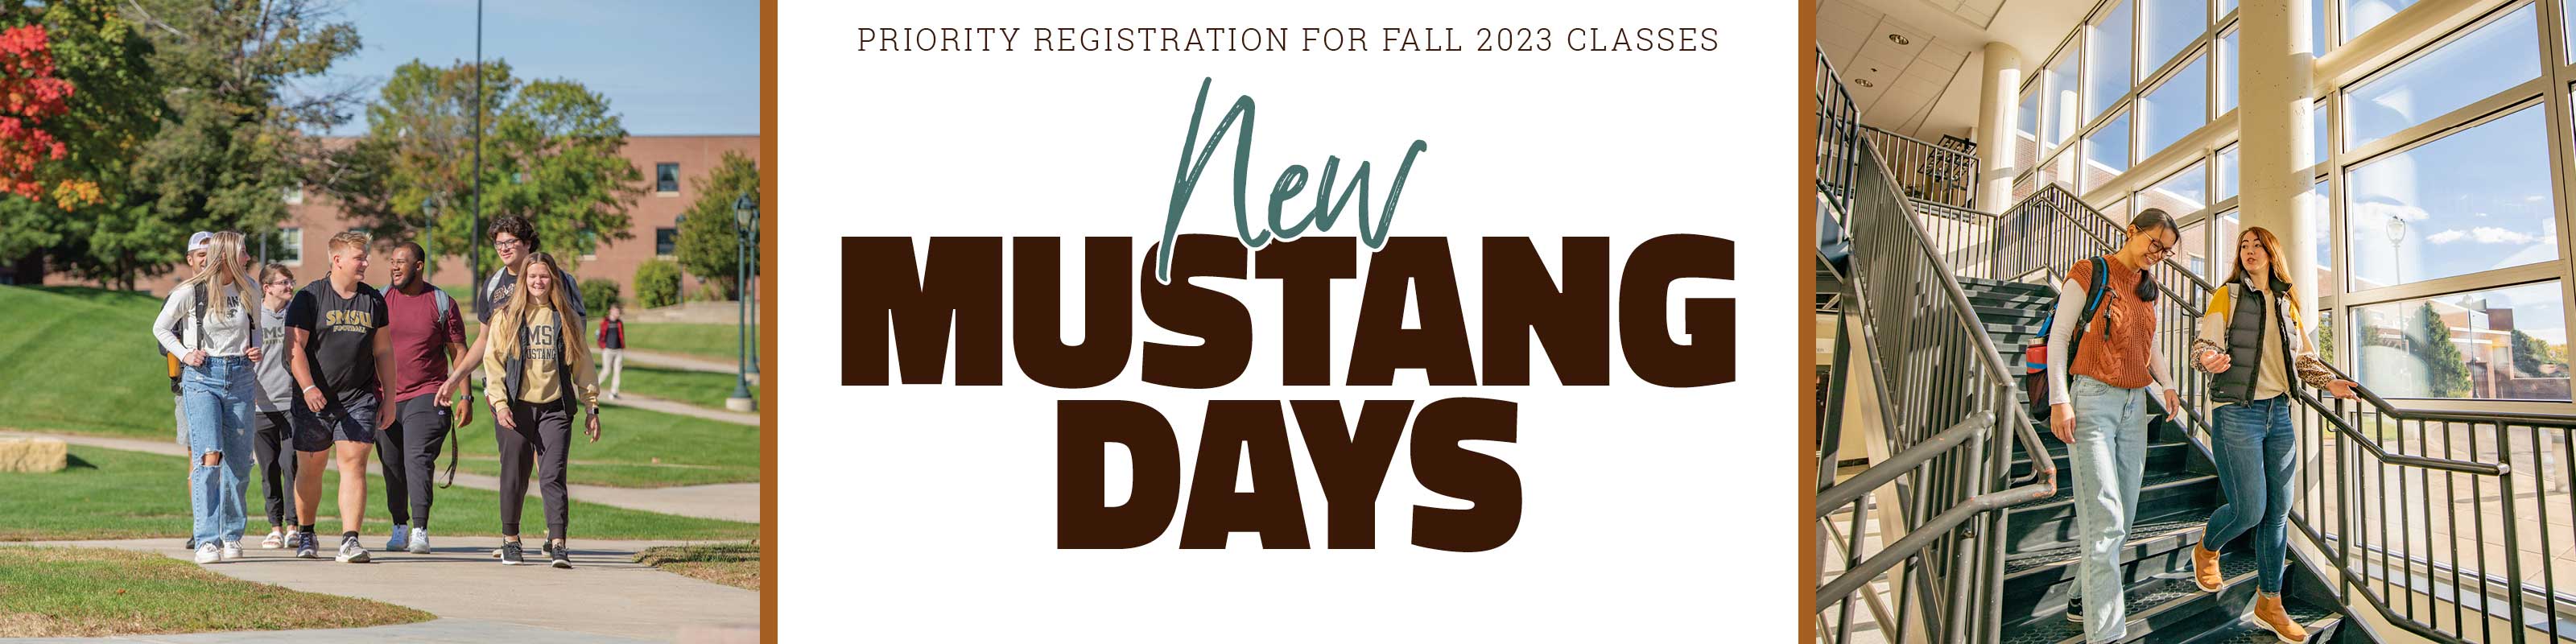 Priority Registration for Fall 2023 Classes - New Mustang Days